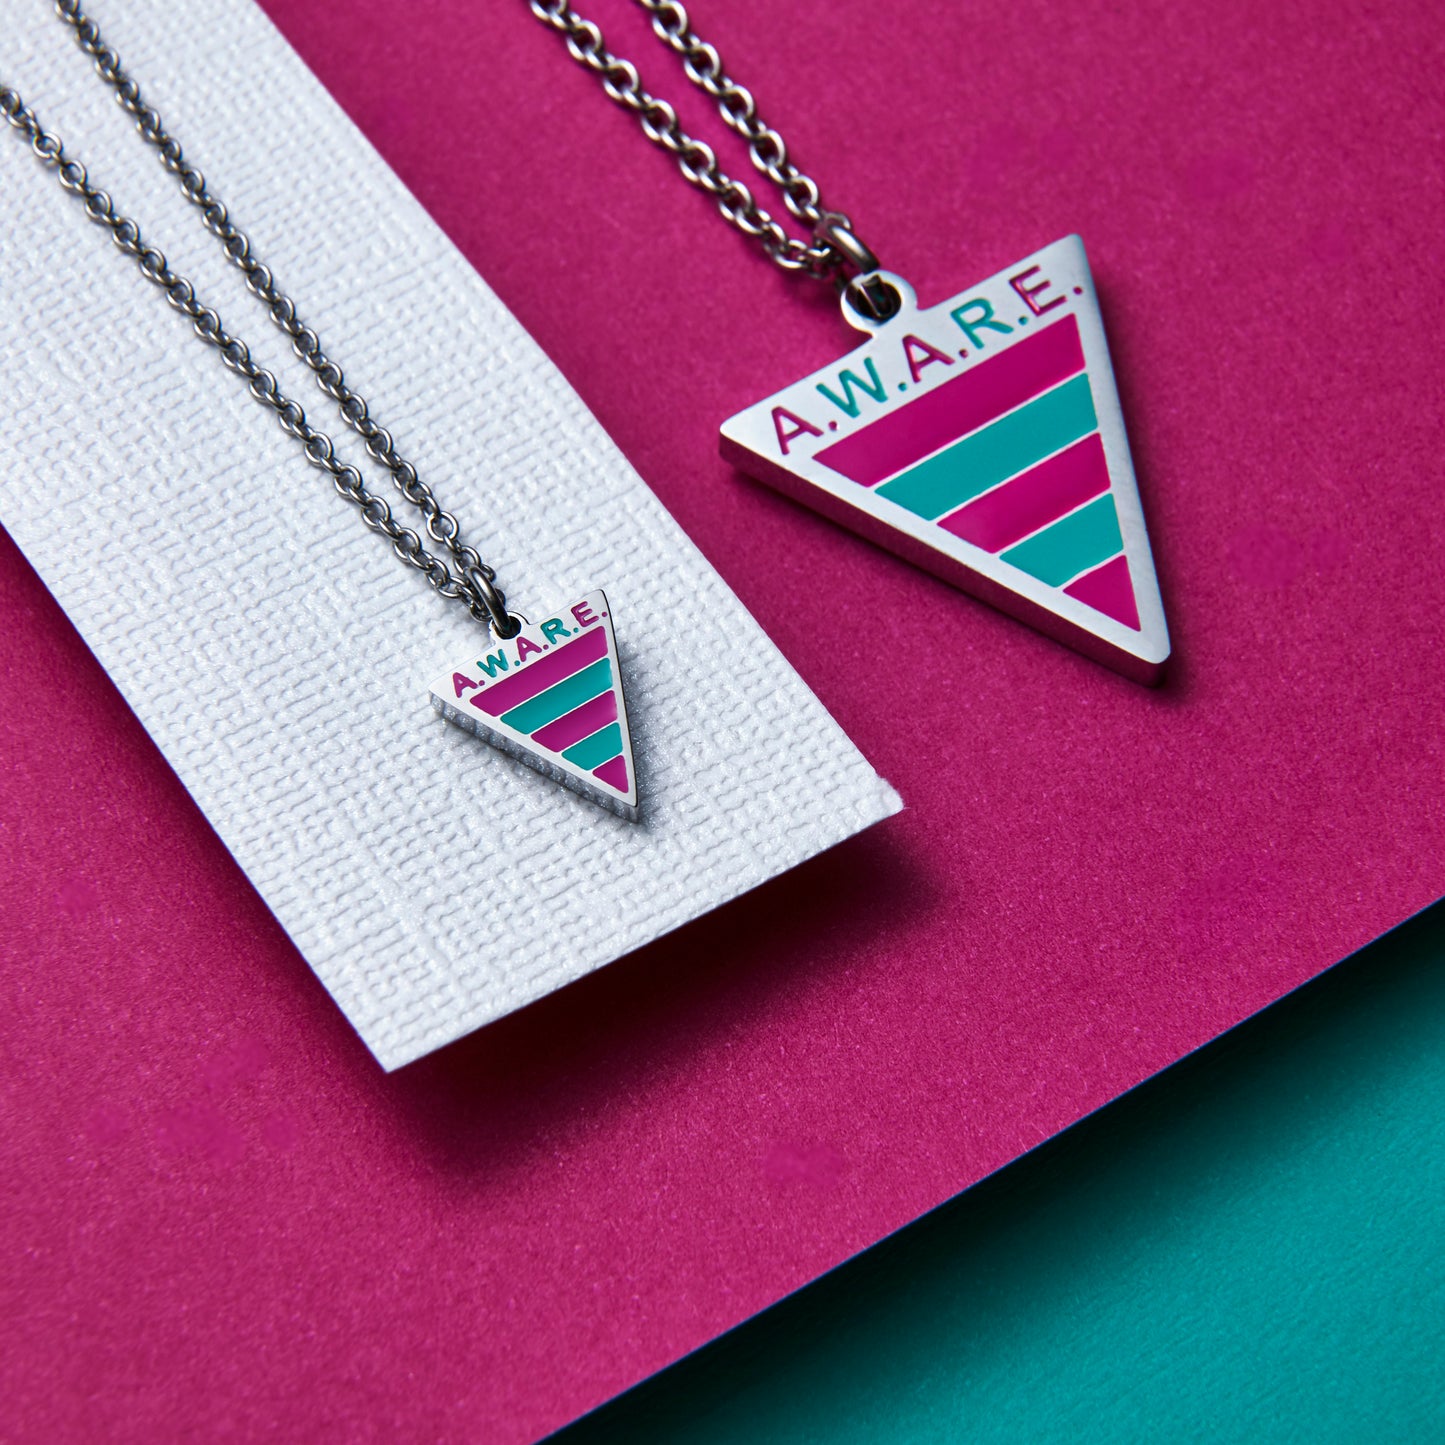 Dainty Pink and Teal Aware Necklaces